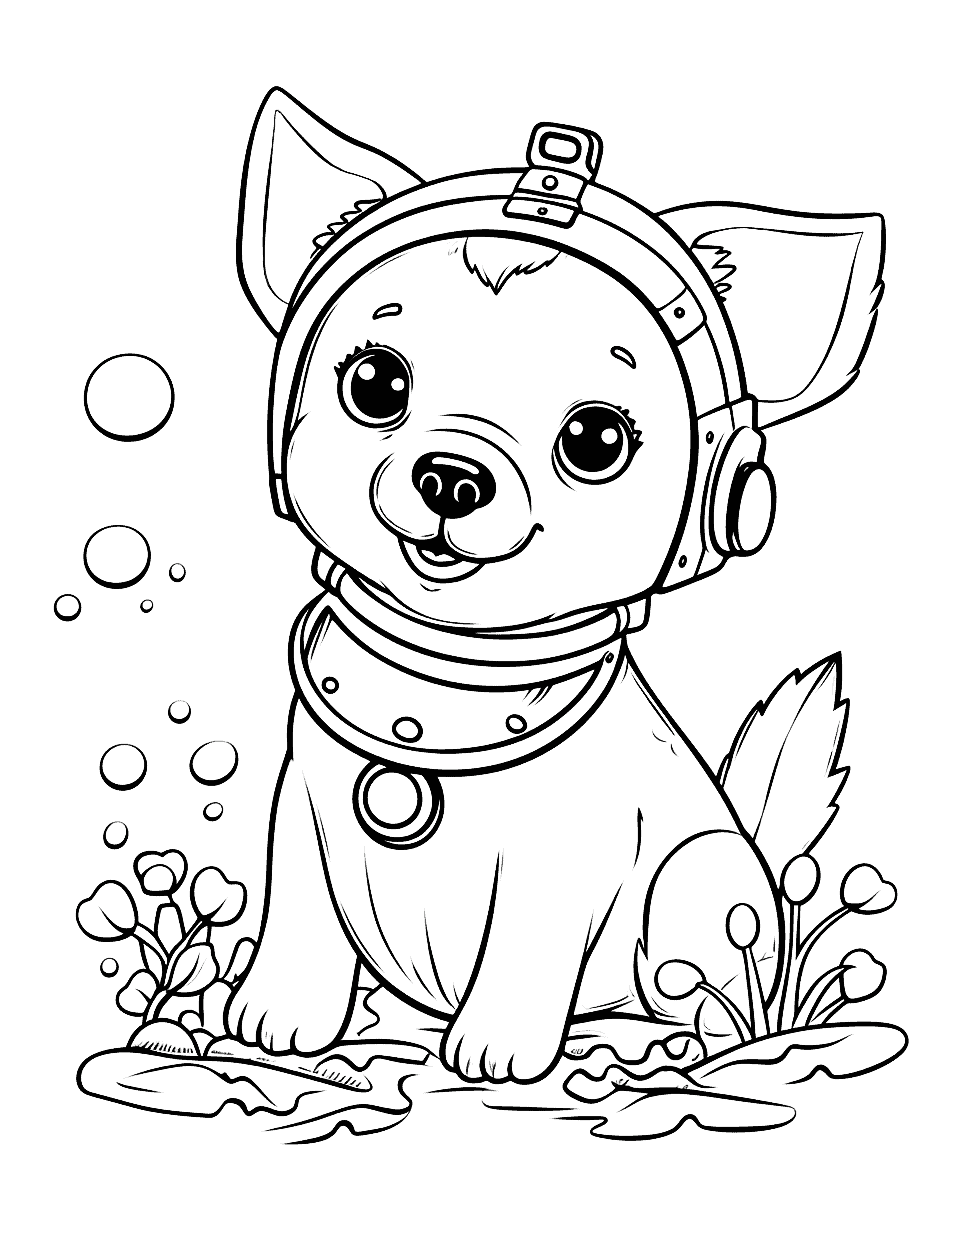 Under the Sea Puppy in a Submarine Coloring Page - A puppy exploring the underwater world in a cute little submarine.